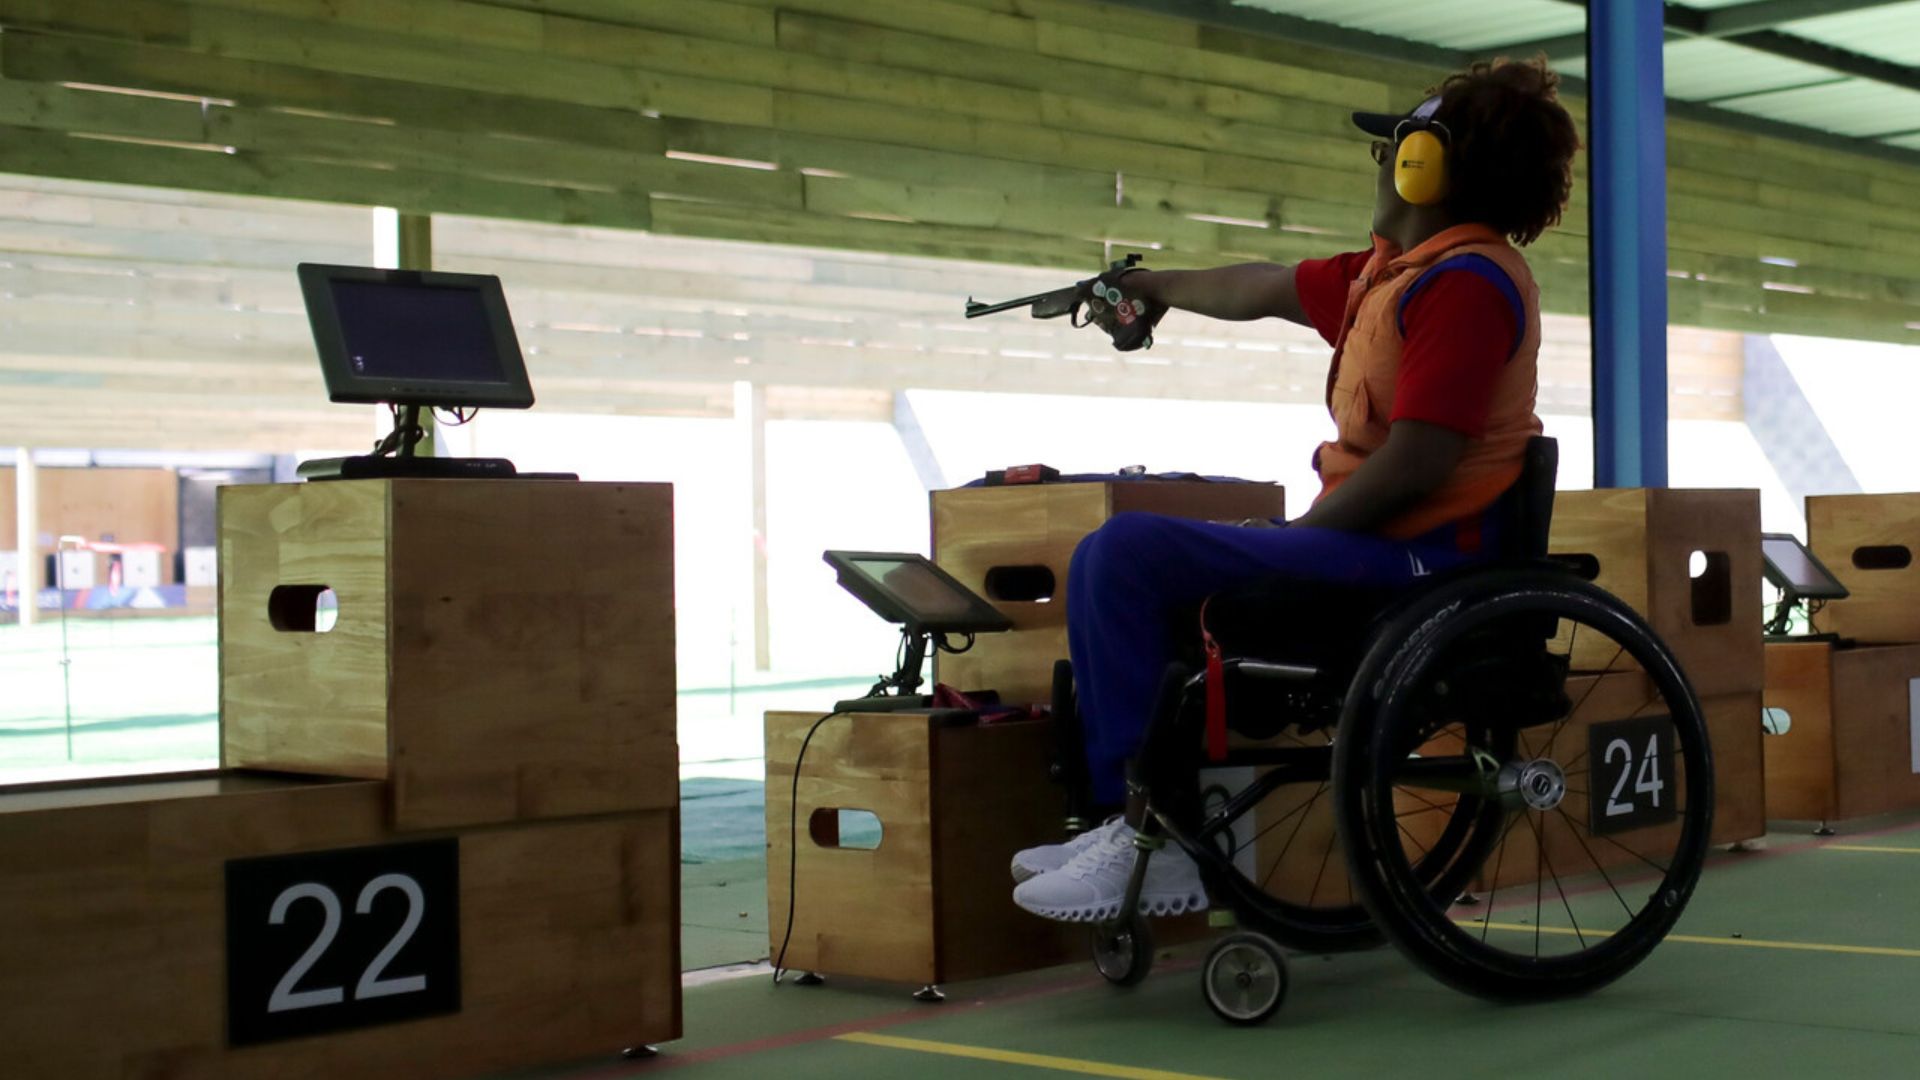 Shooting Para Sport: Cuban Yenigladys Suárez Adds Another Gold for Her Country